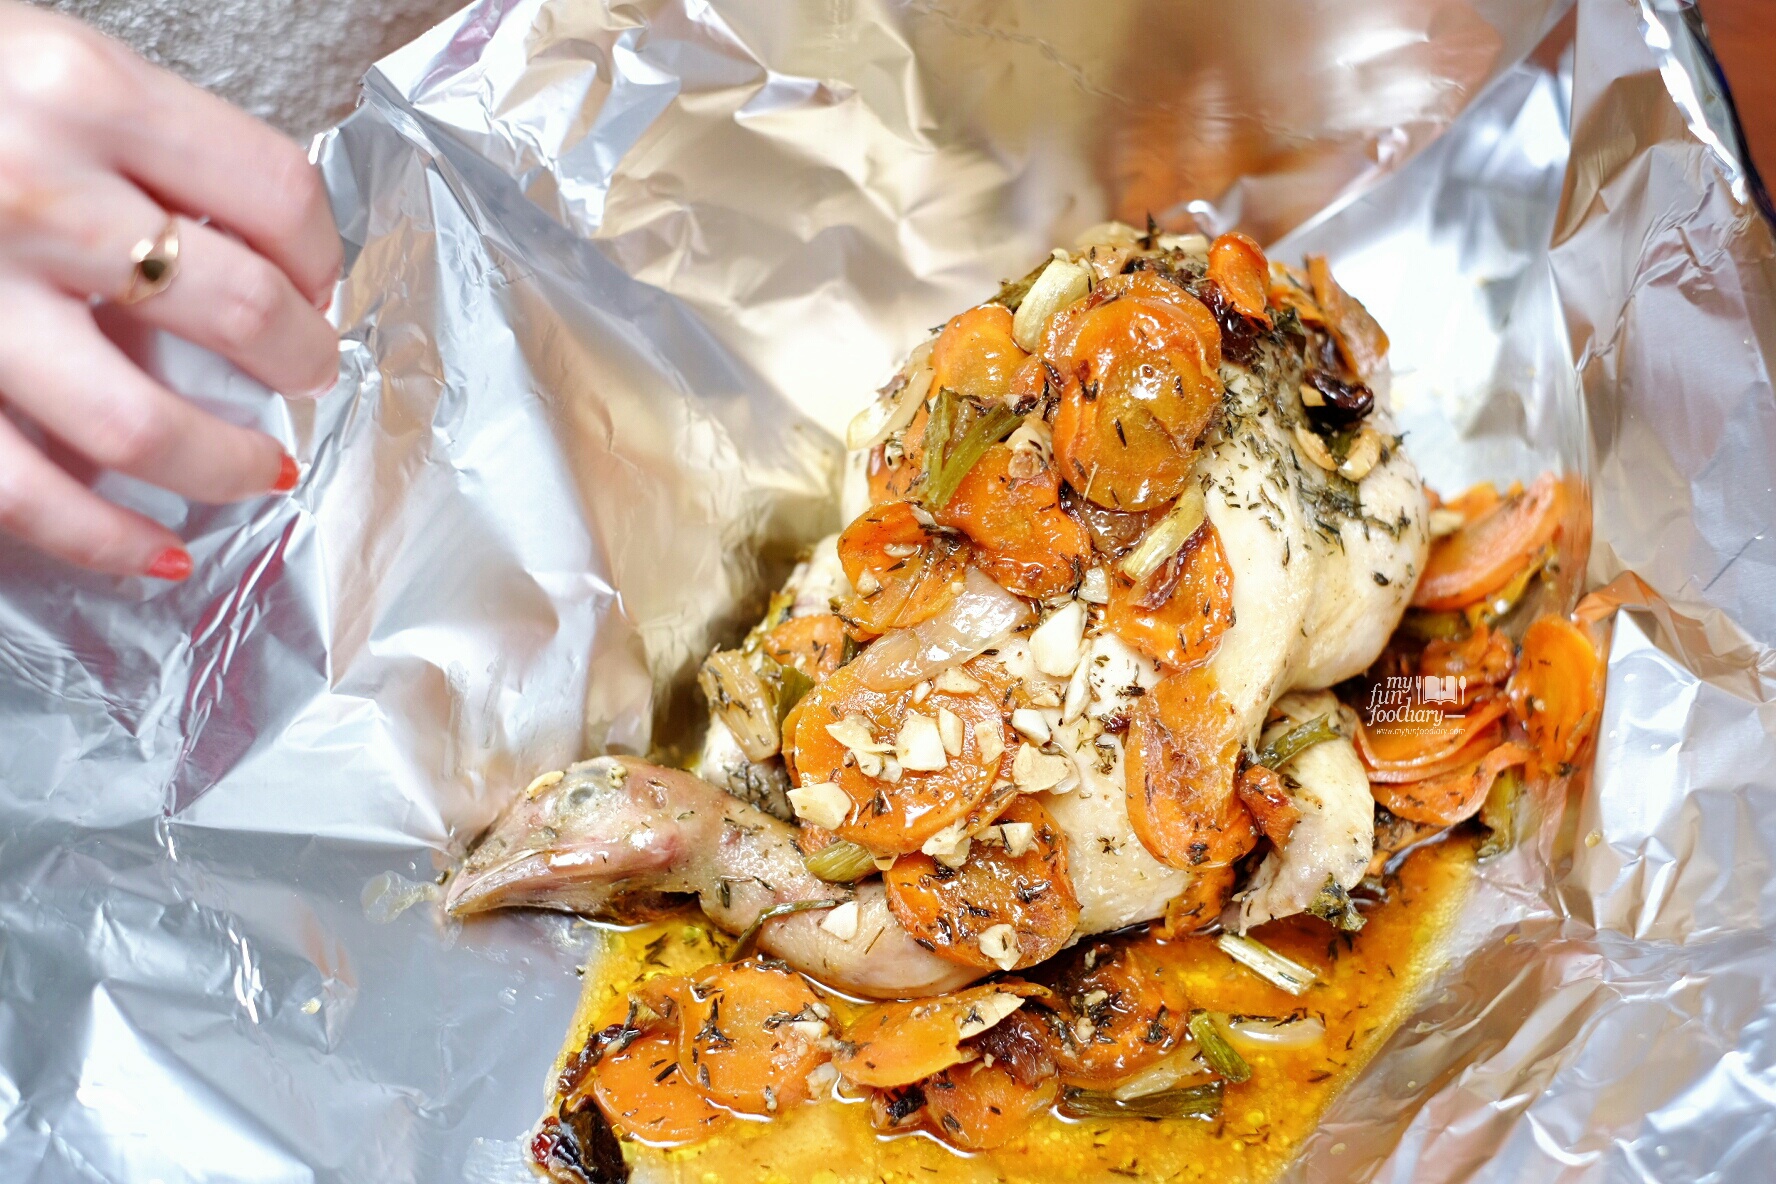 Wrap the Chicken with alumunium foil by Myfunfoodiary